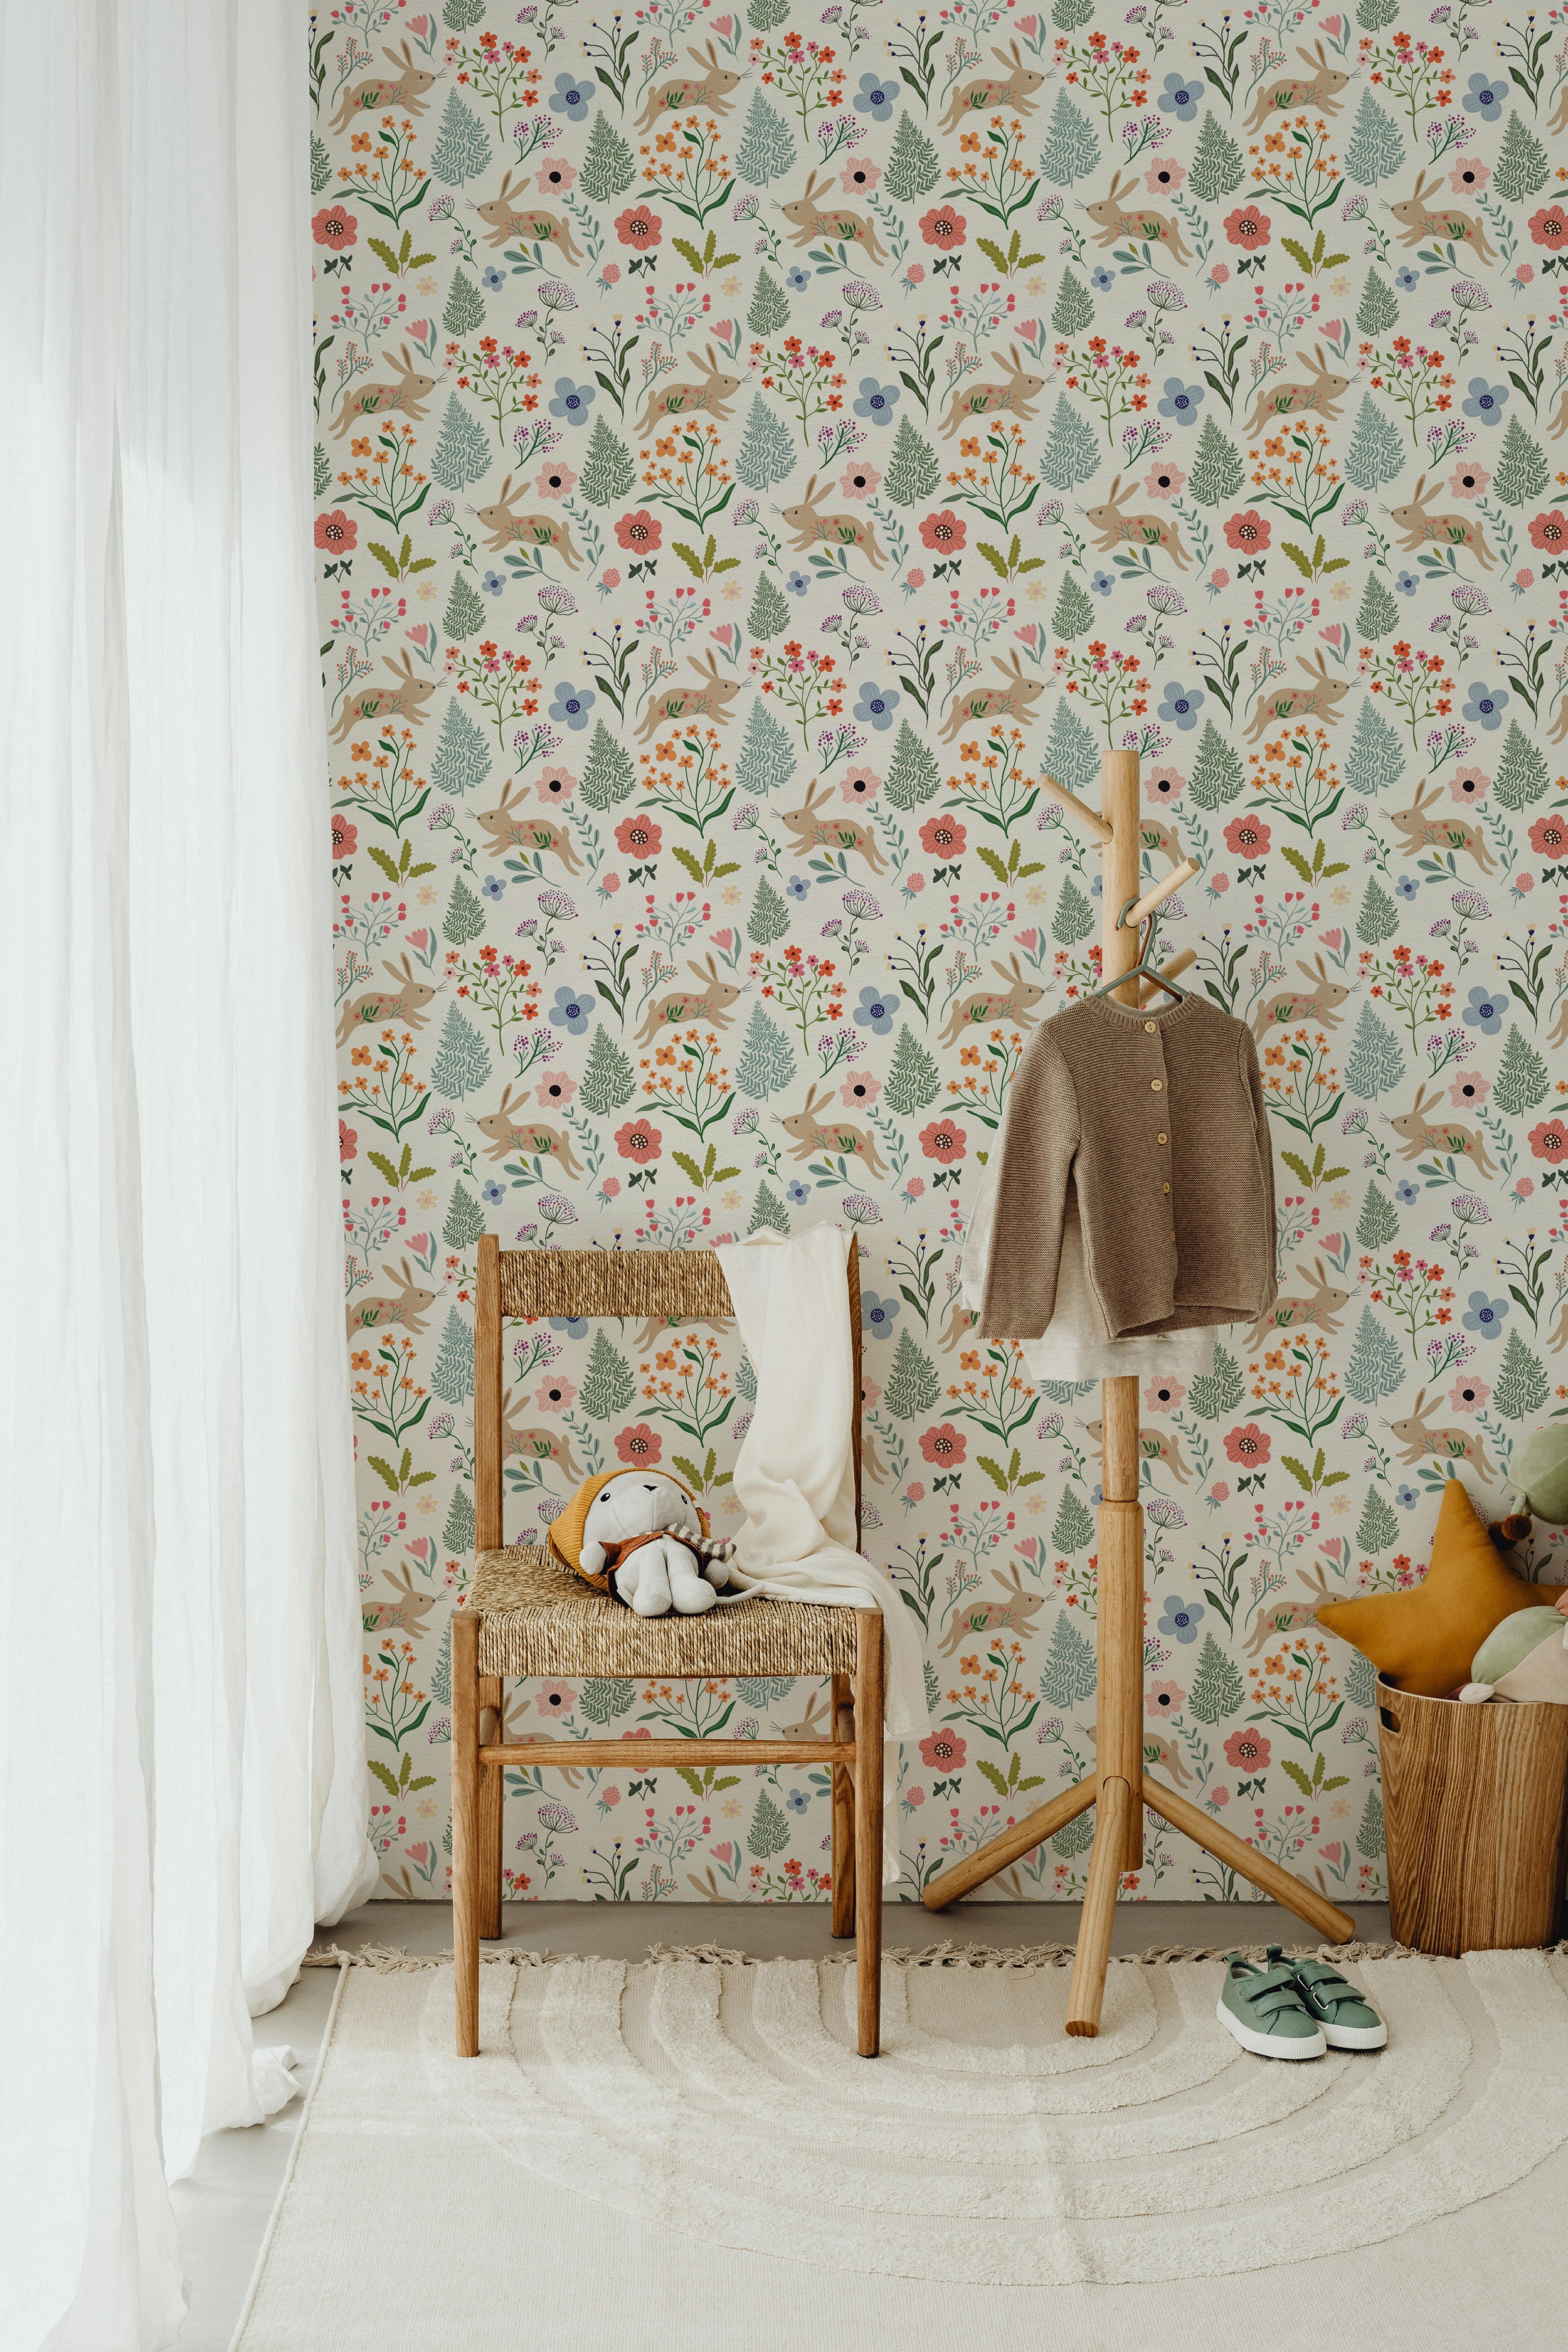 A cozy corner of a room decorated with the Colourful Spring Bunnies Wallpaper, accompanied by a rustic wooden chair and a small white curtain. The wallpaper's mix of bunnies and assorted floral patterns creates a peaceful, nature-inspired ambiance.